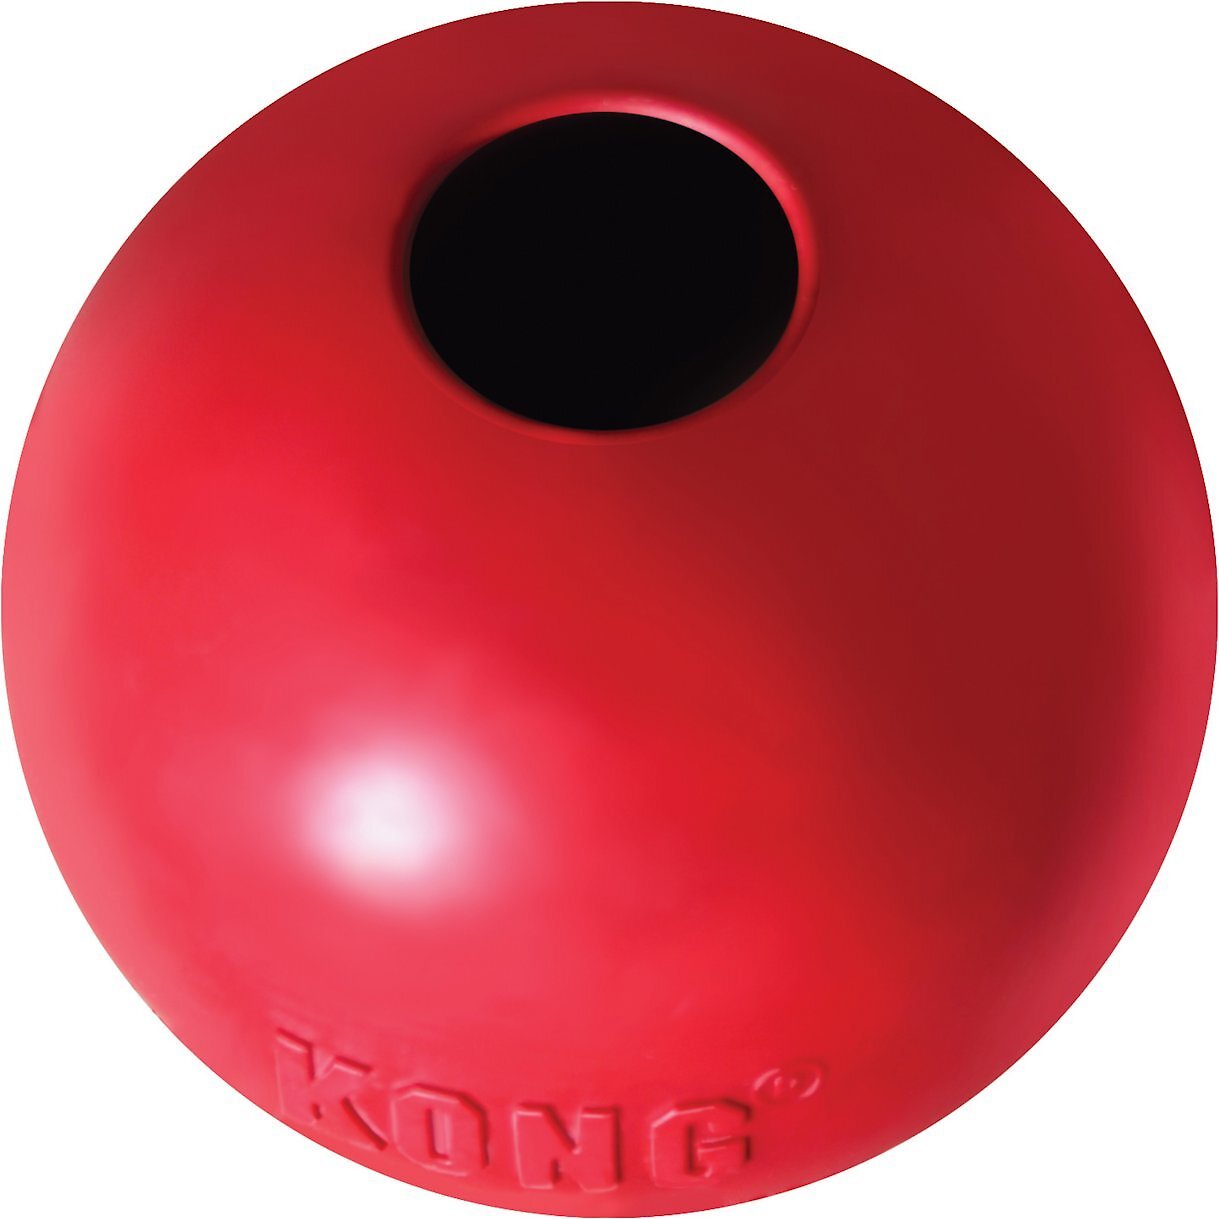 KONG Ball Dog Toy | Chewy (Free Shipping)